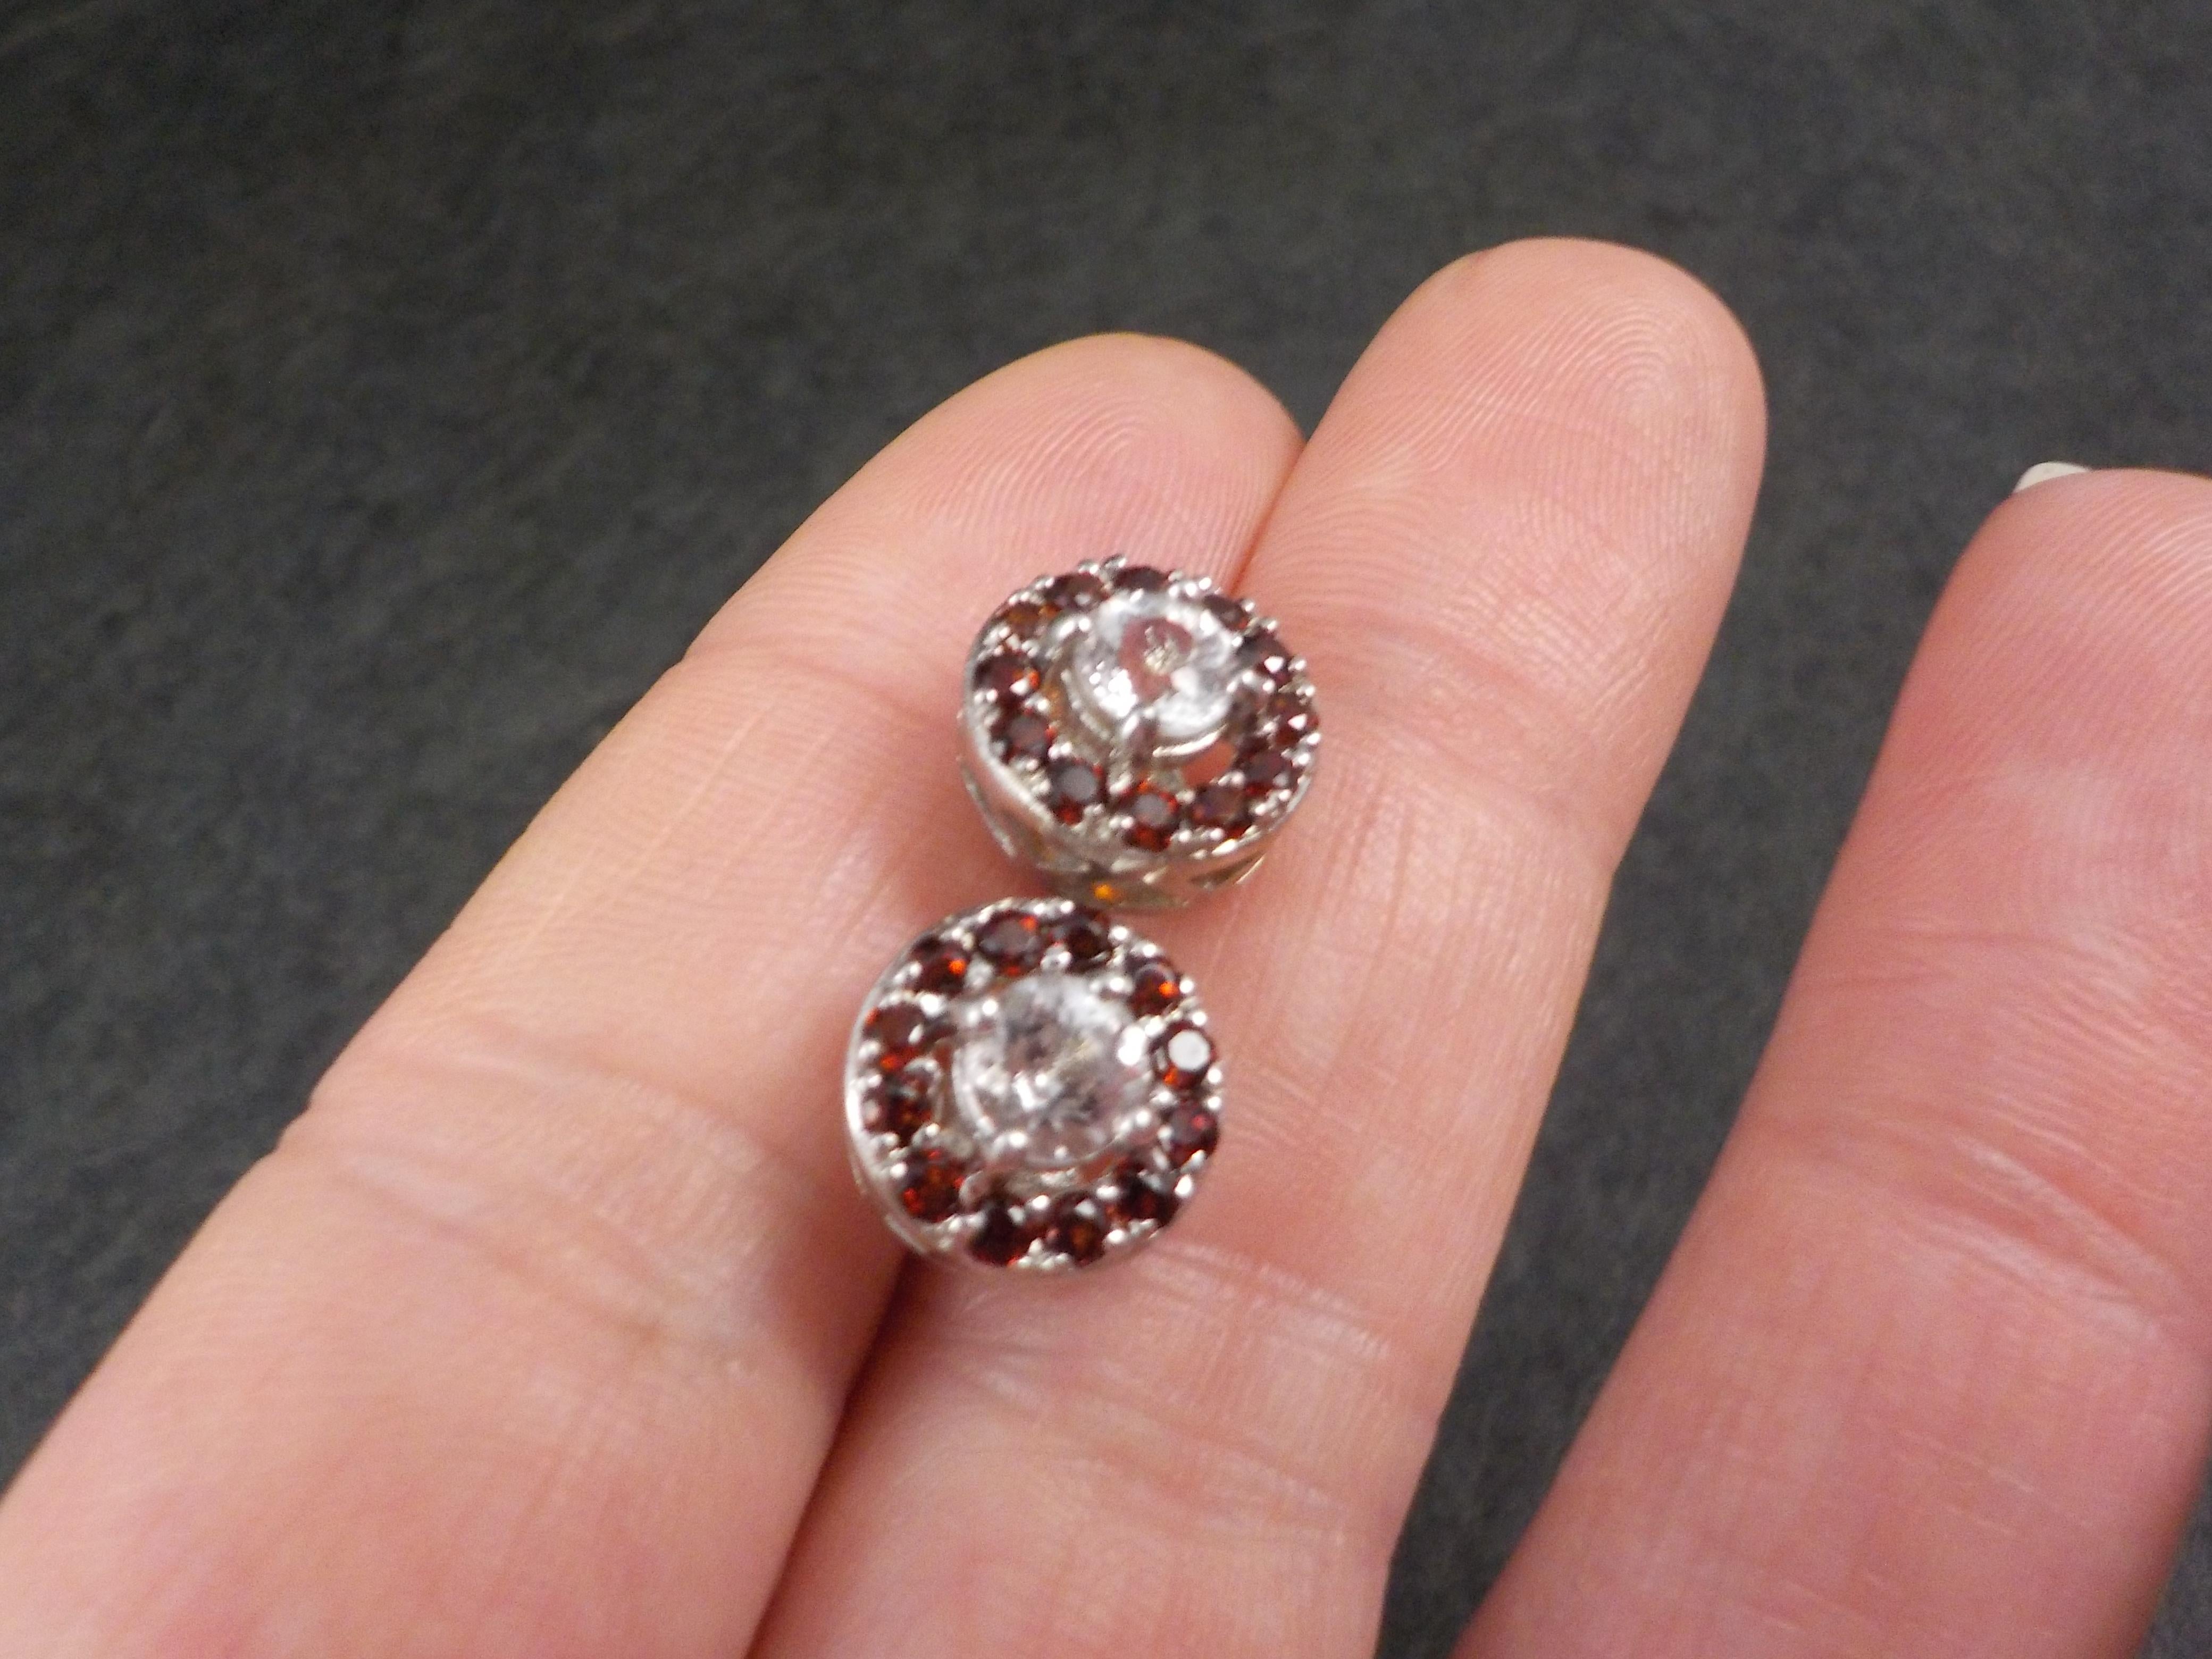 Quartz and Garnet Halo Stud Earrings Sterling Silver For Sale 2